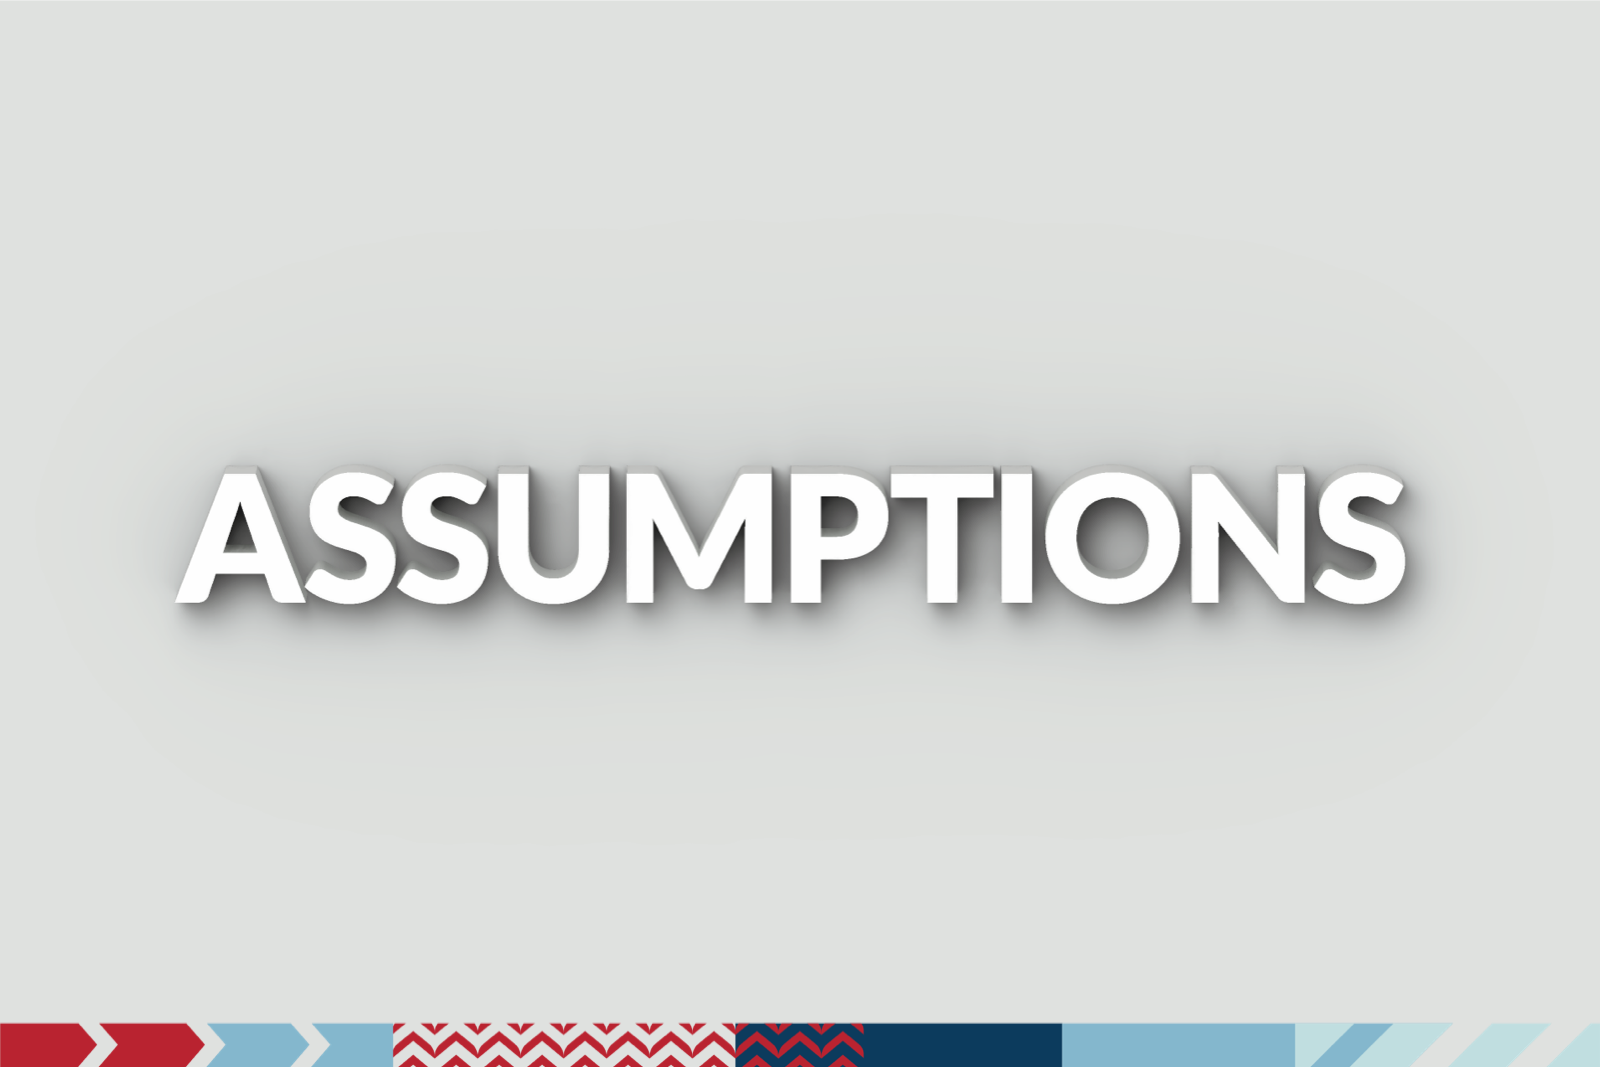 You Know What They Say About Assumptions: Make Good Ones Article Featured Image